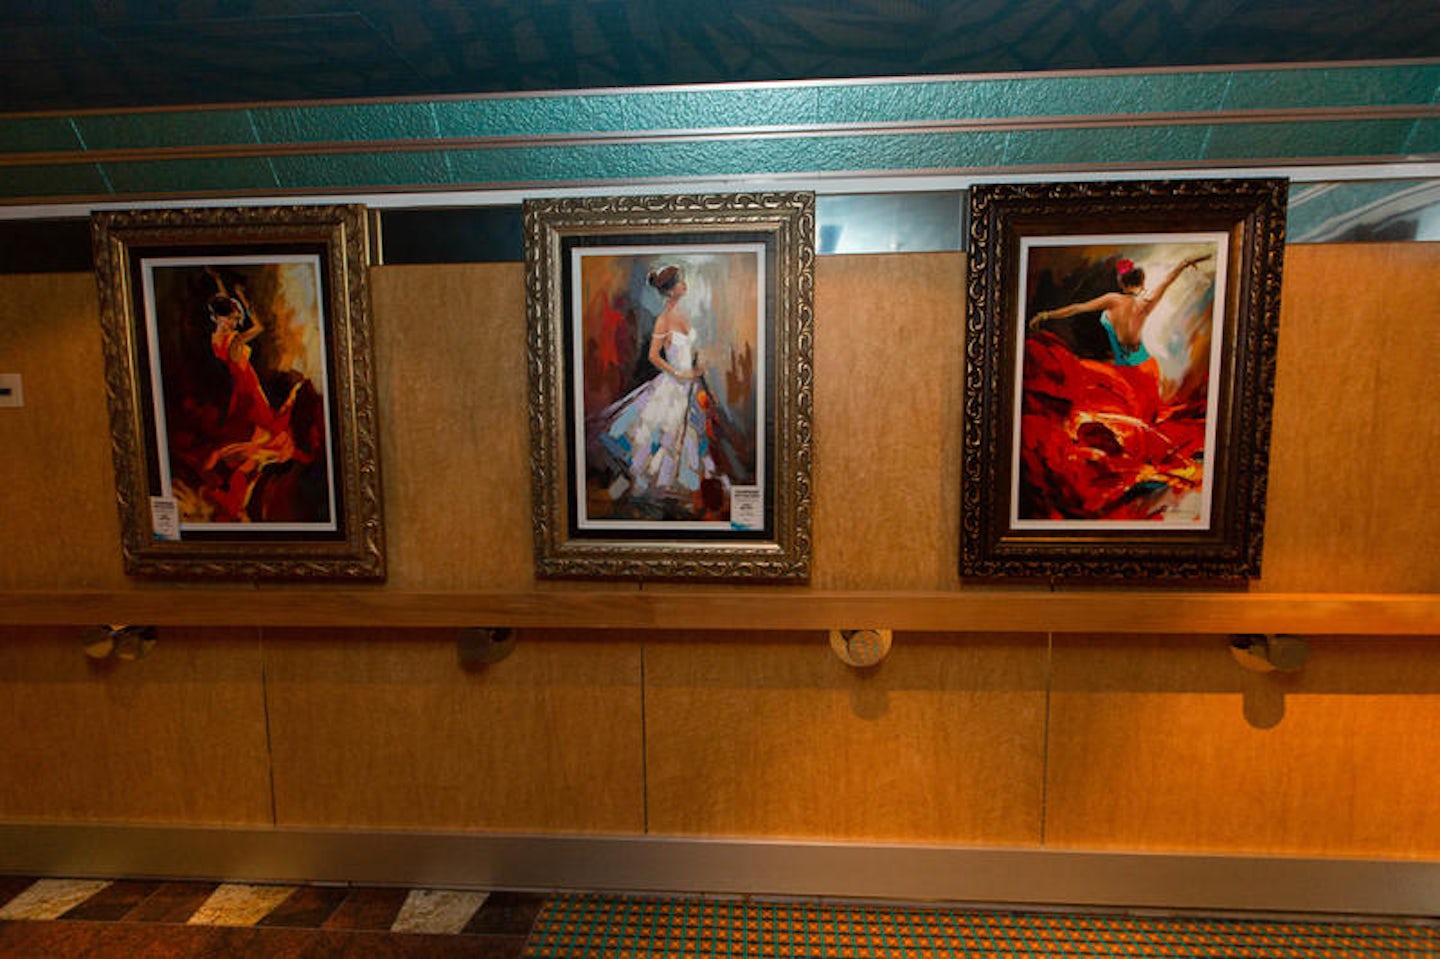 Gallery on the Way on Carnival Magic